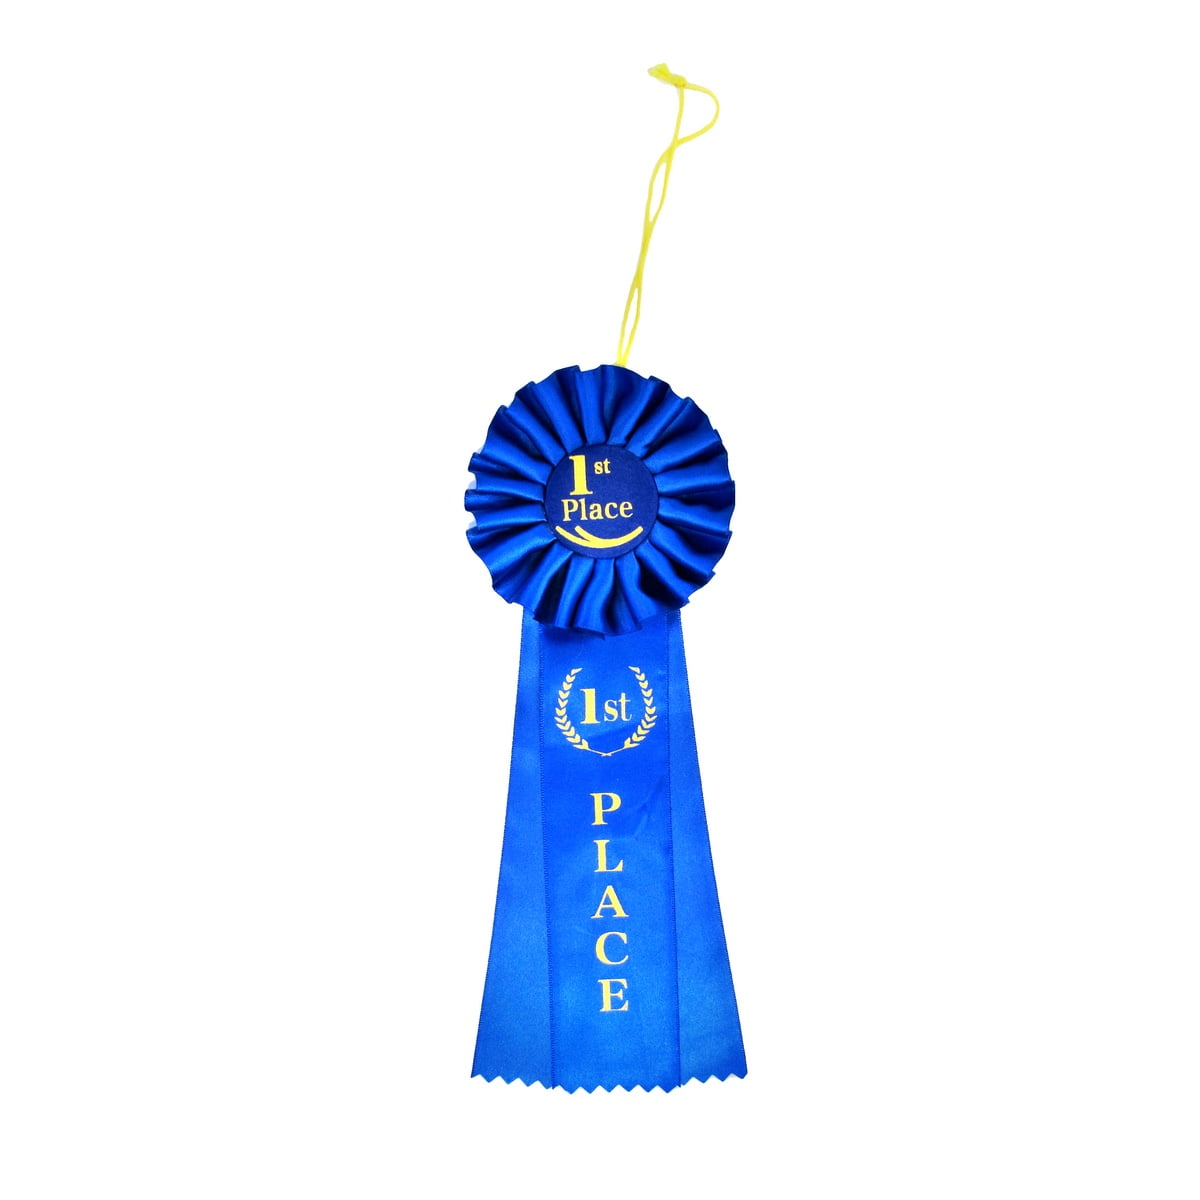 12 Pieces Blank Award Ribbon, 1st Place Rosette Ribbon Prize Ribbon Award  Medals Winner Victory Ribbons Deluxe Recognition Ribbons for Competition